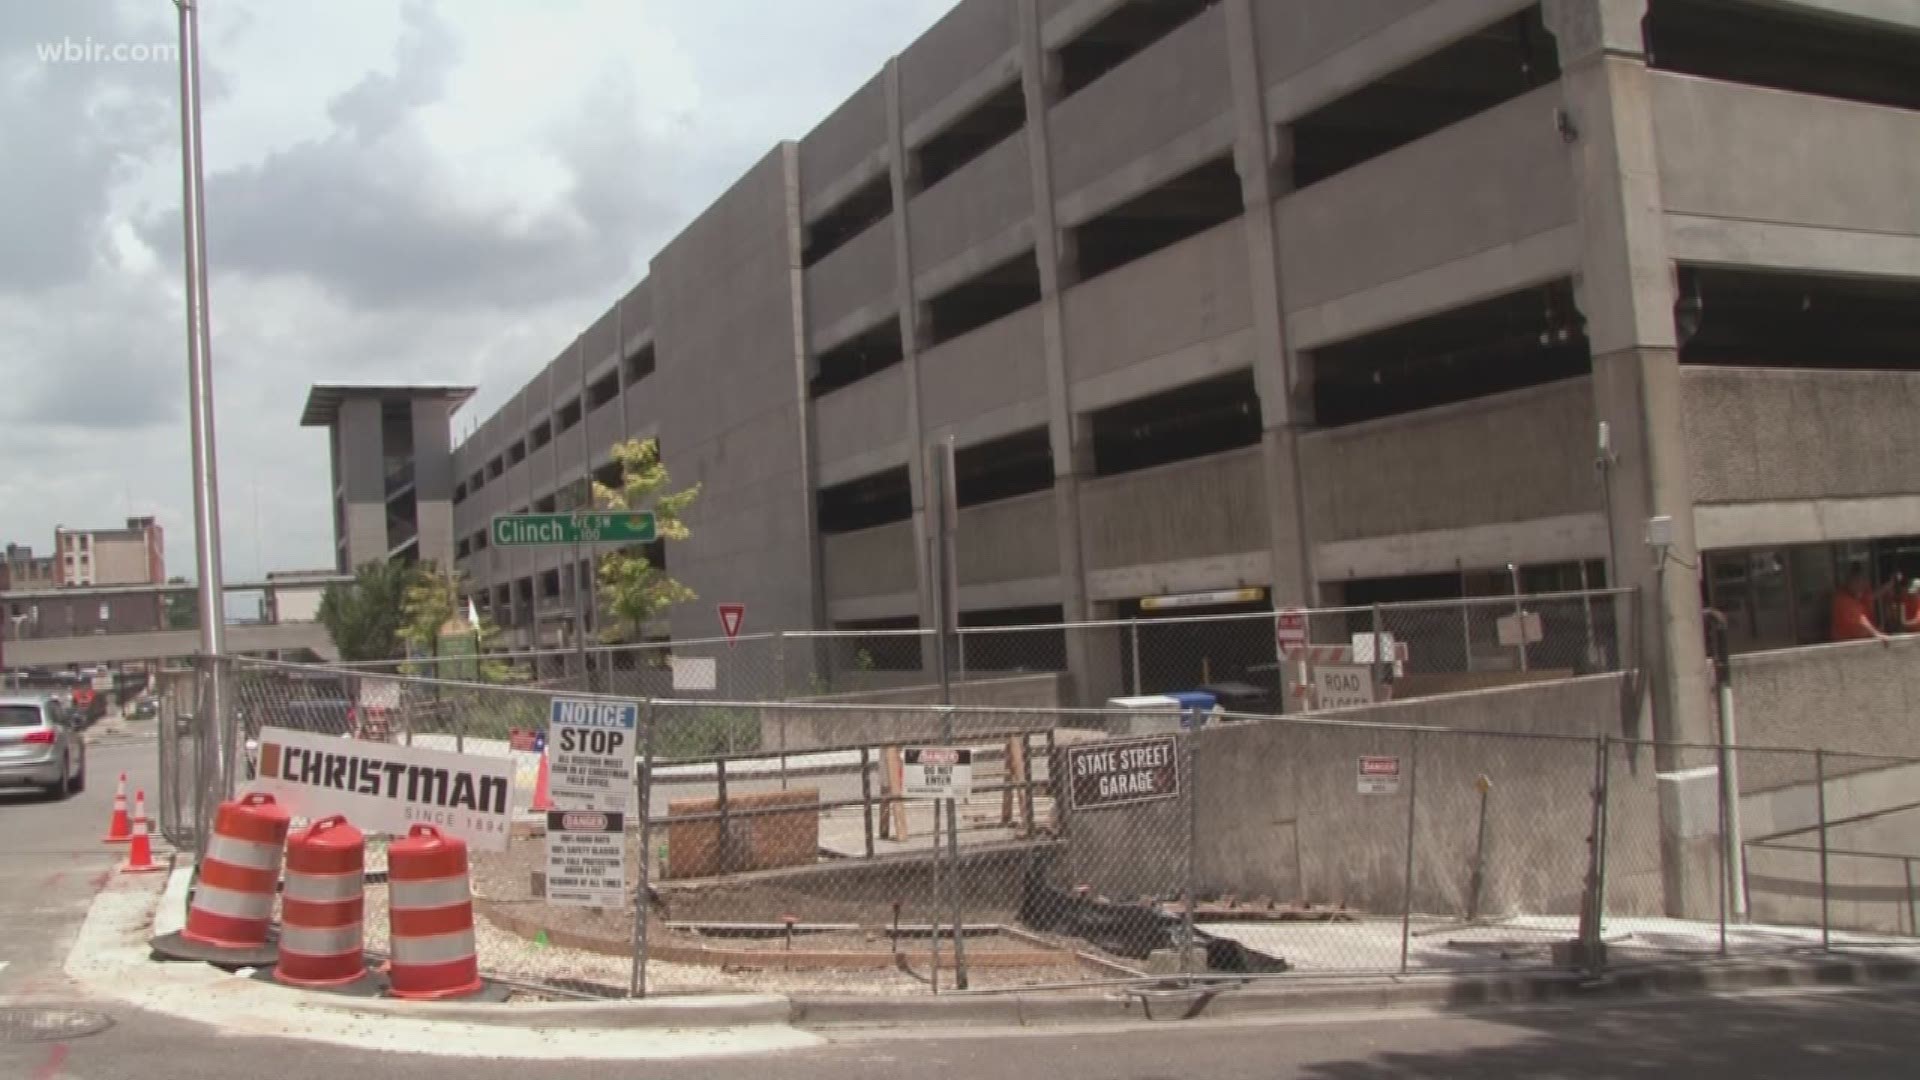 It's taken about seven months and $11 million, but the State Street Garage expansion is finally open.